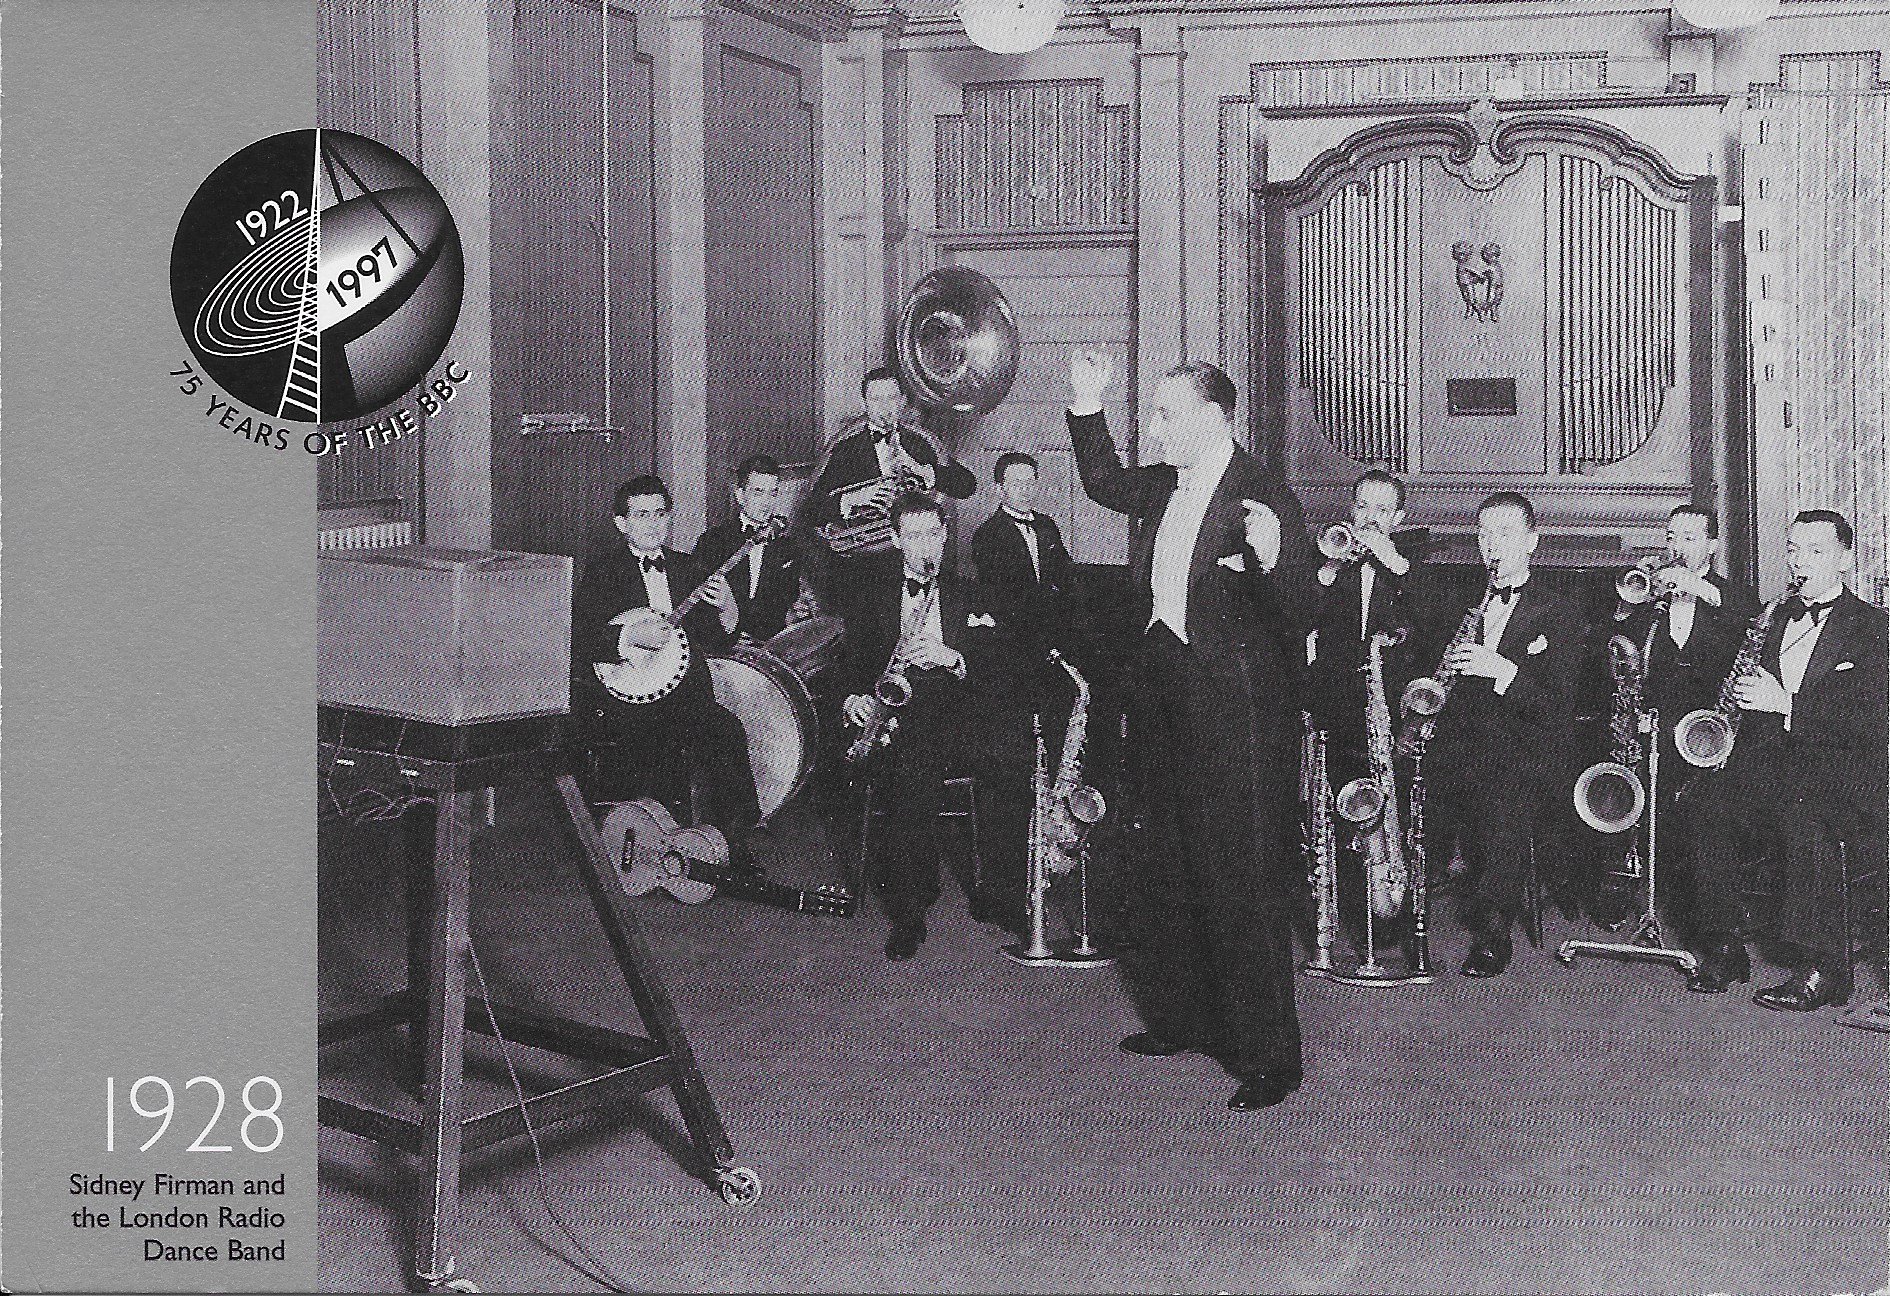 Picture of 75 years of the BBC - Sir Sidney Firman and the London Radio dance band by artist Unknown from the BBC postcards - Records and Tapes library